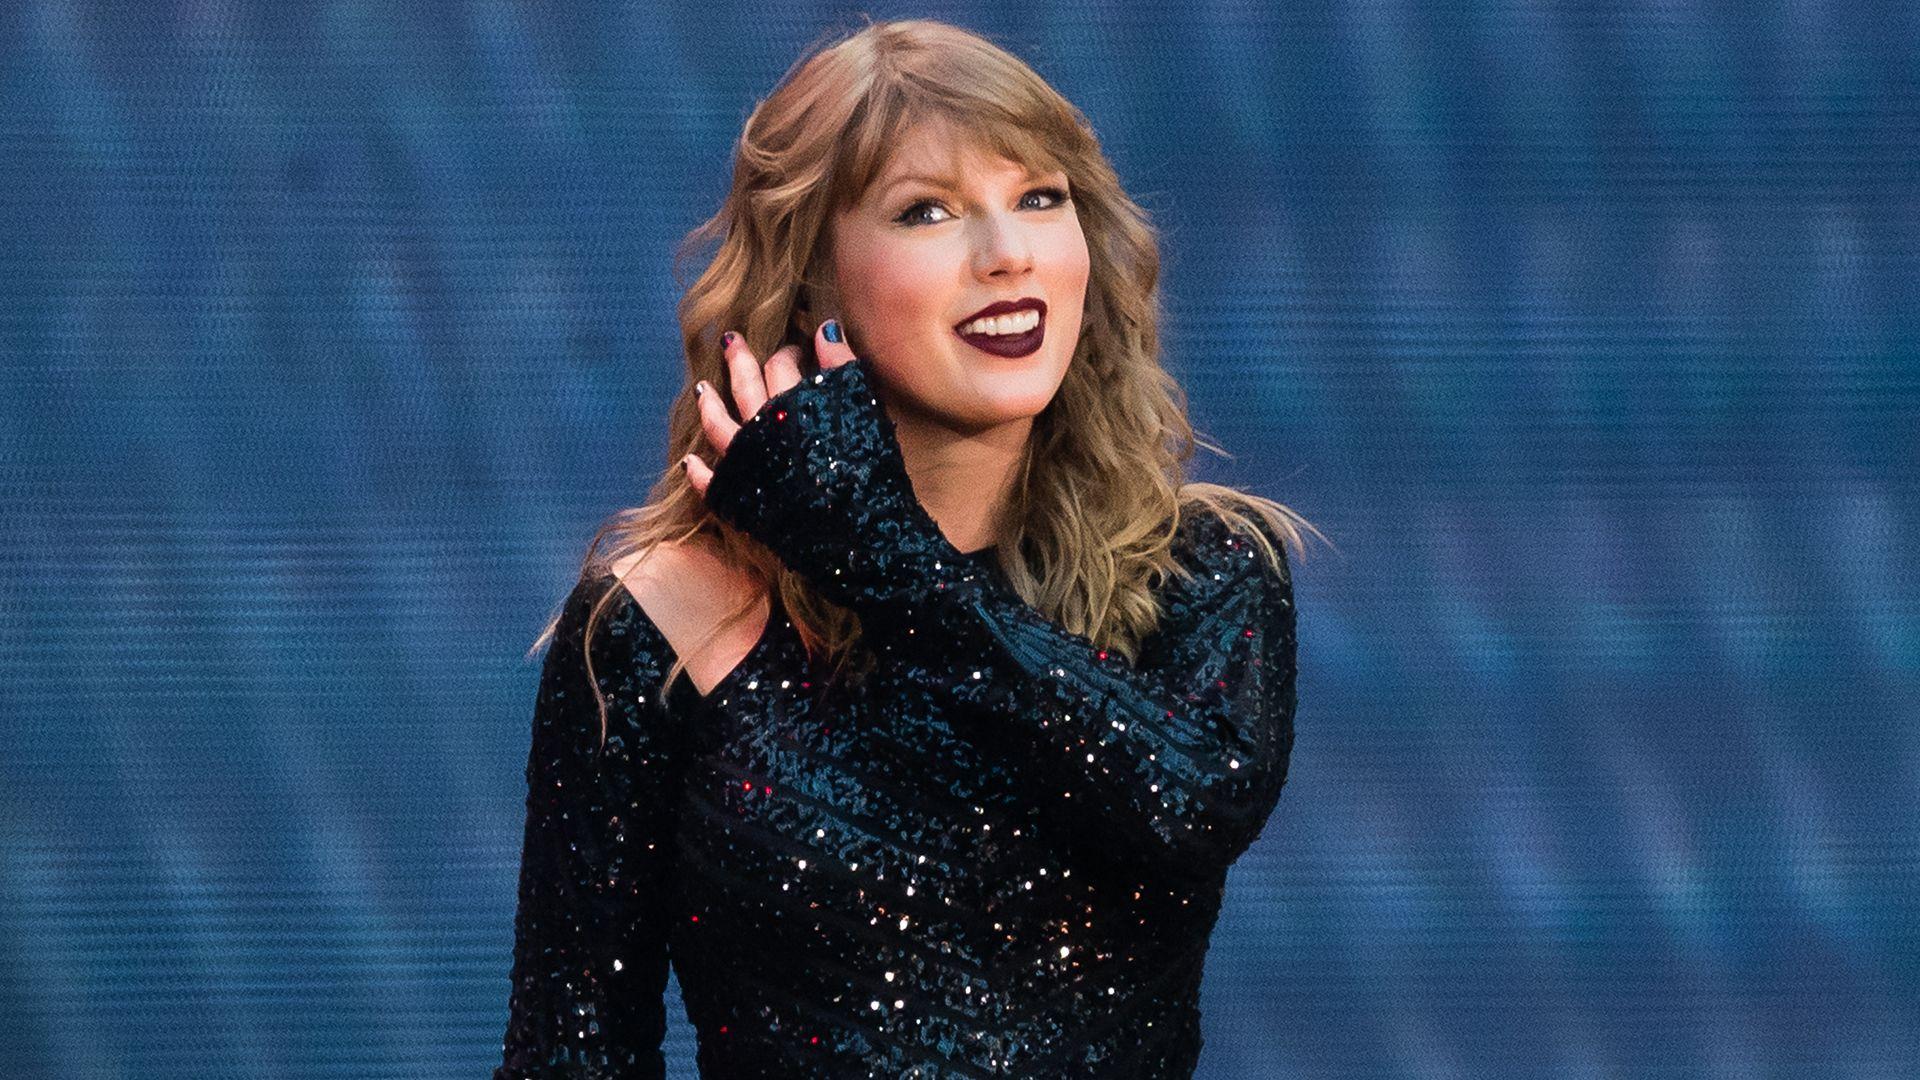 Taylor Swift Almost Hit by Bird at 'Reputation' Concert